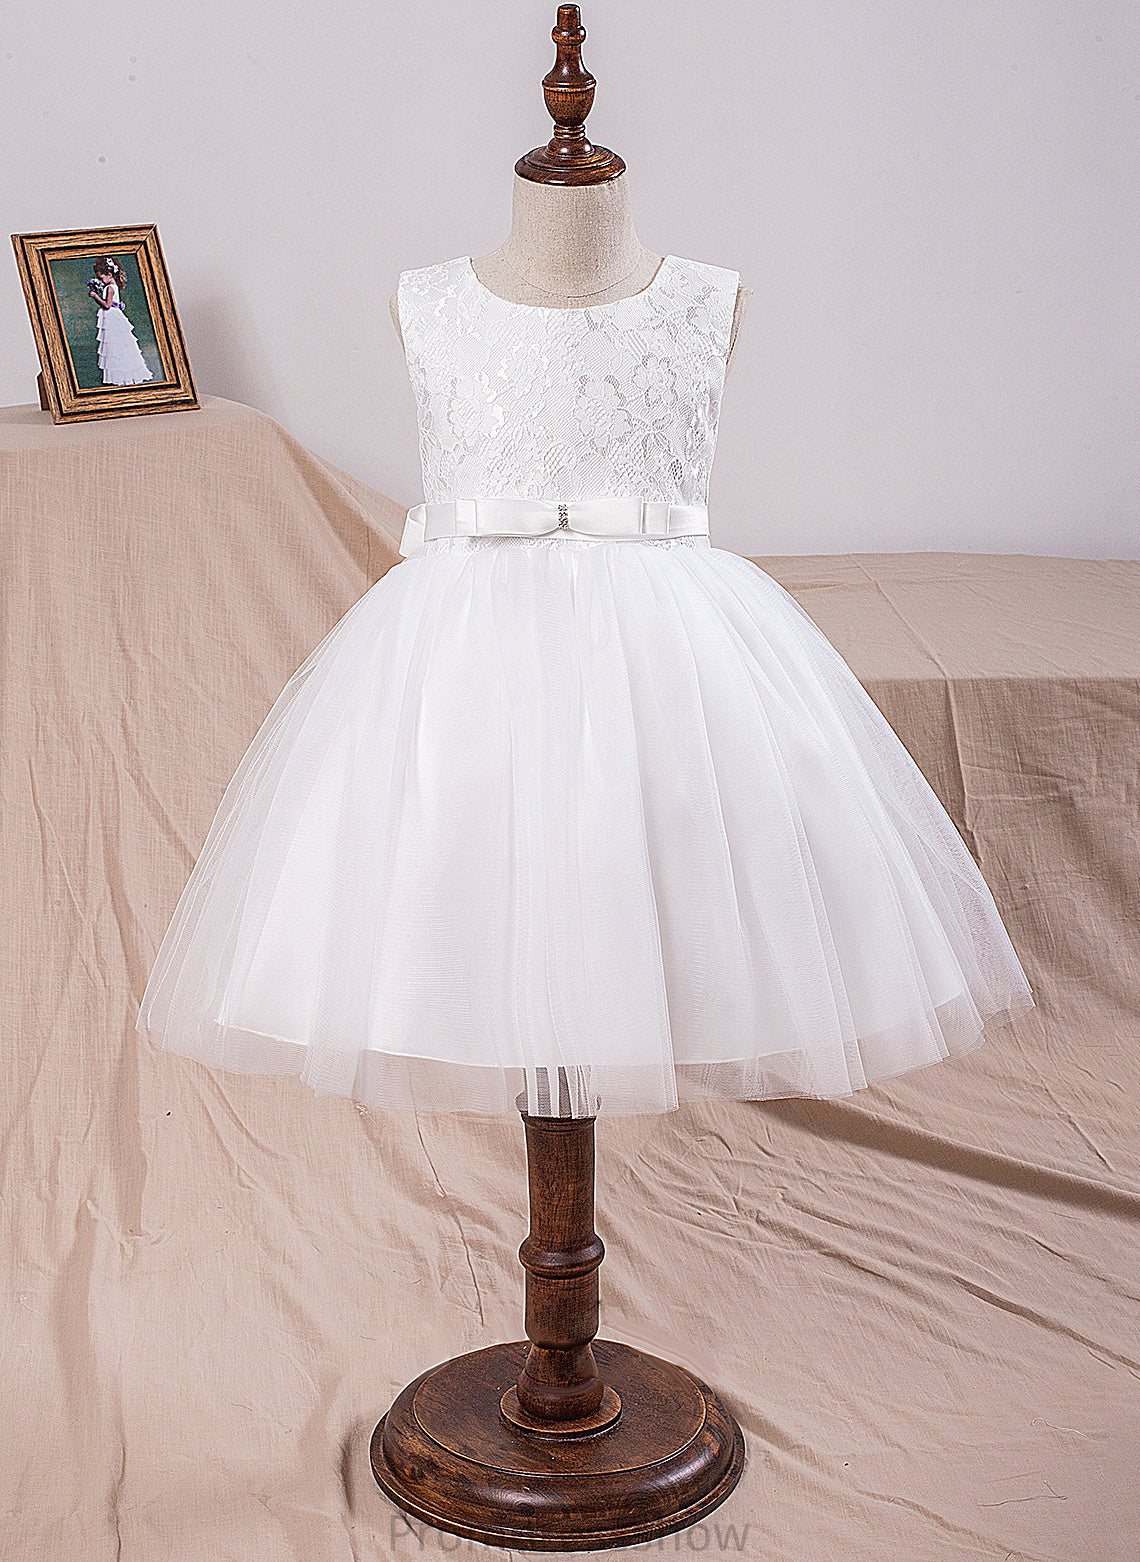 Flower Flower Girl Dresses Knee-length Tulle/Lace - Sleeveless Neck Jenna With Dress Scoop Girl Bow(s) Ball-Gown/Princess